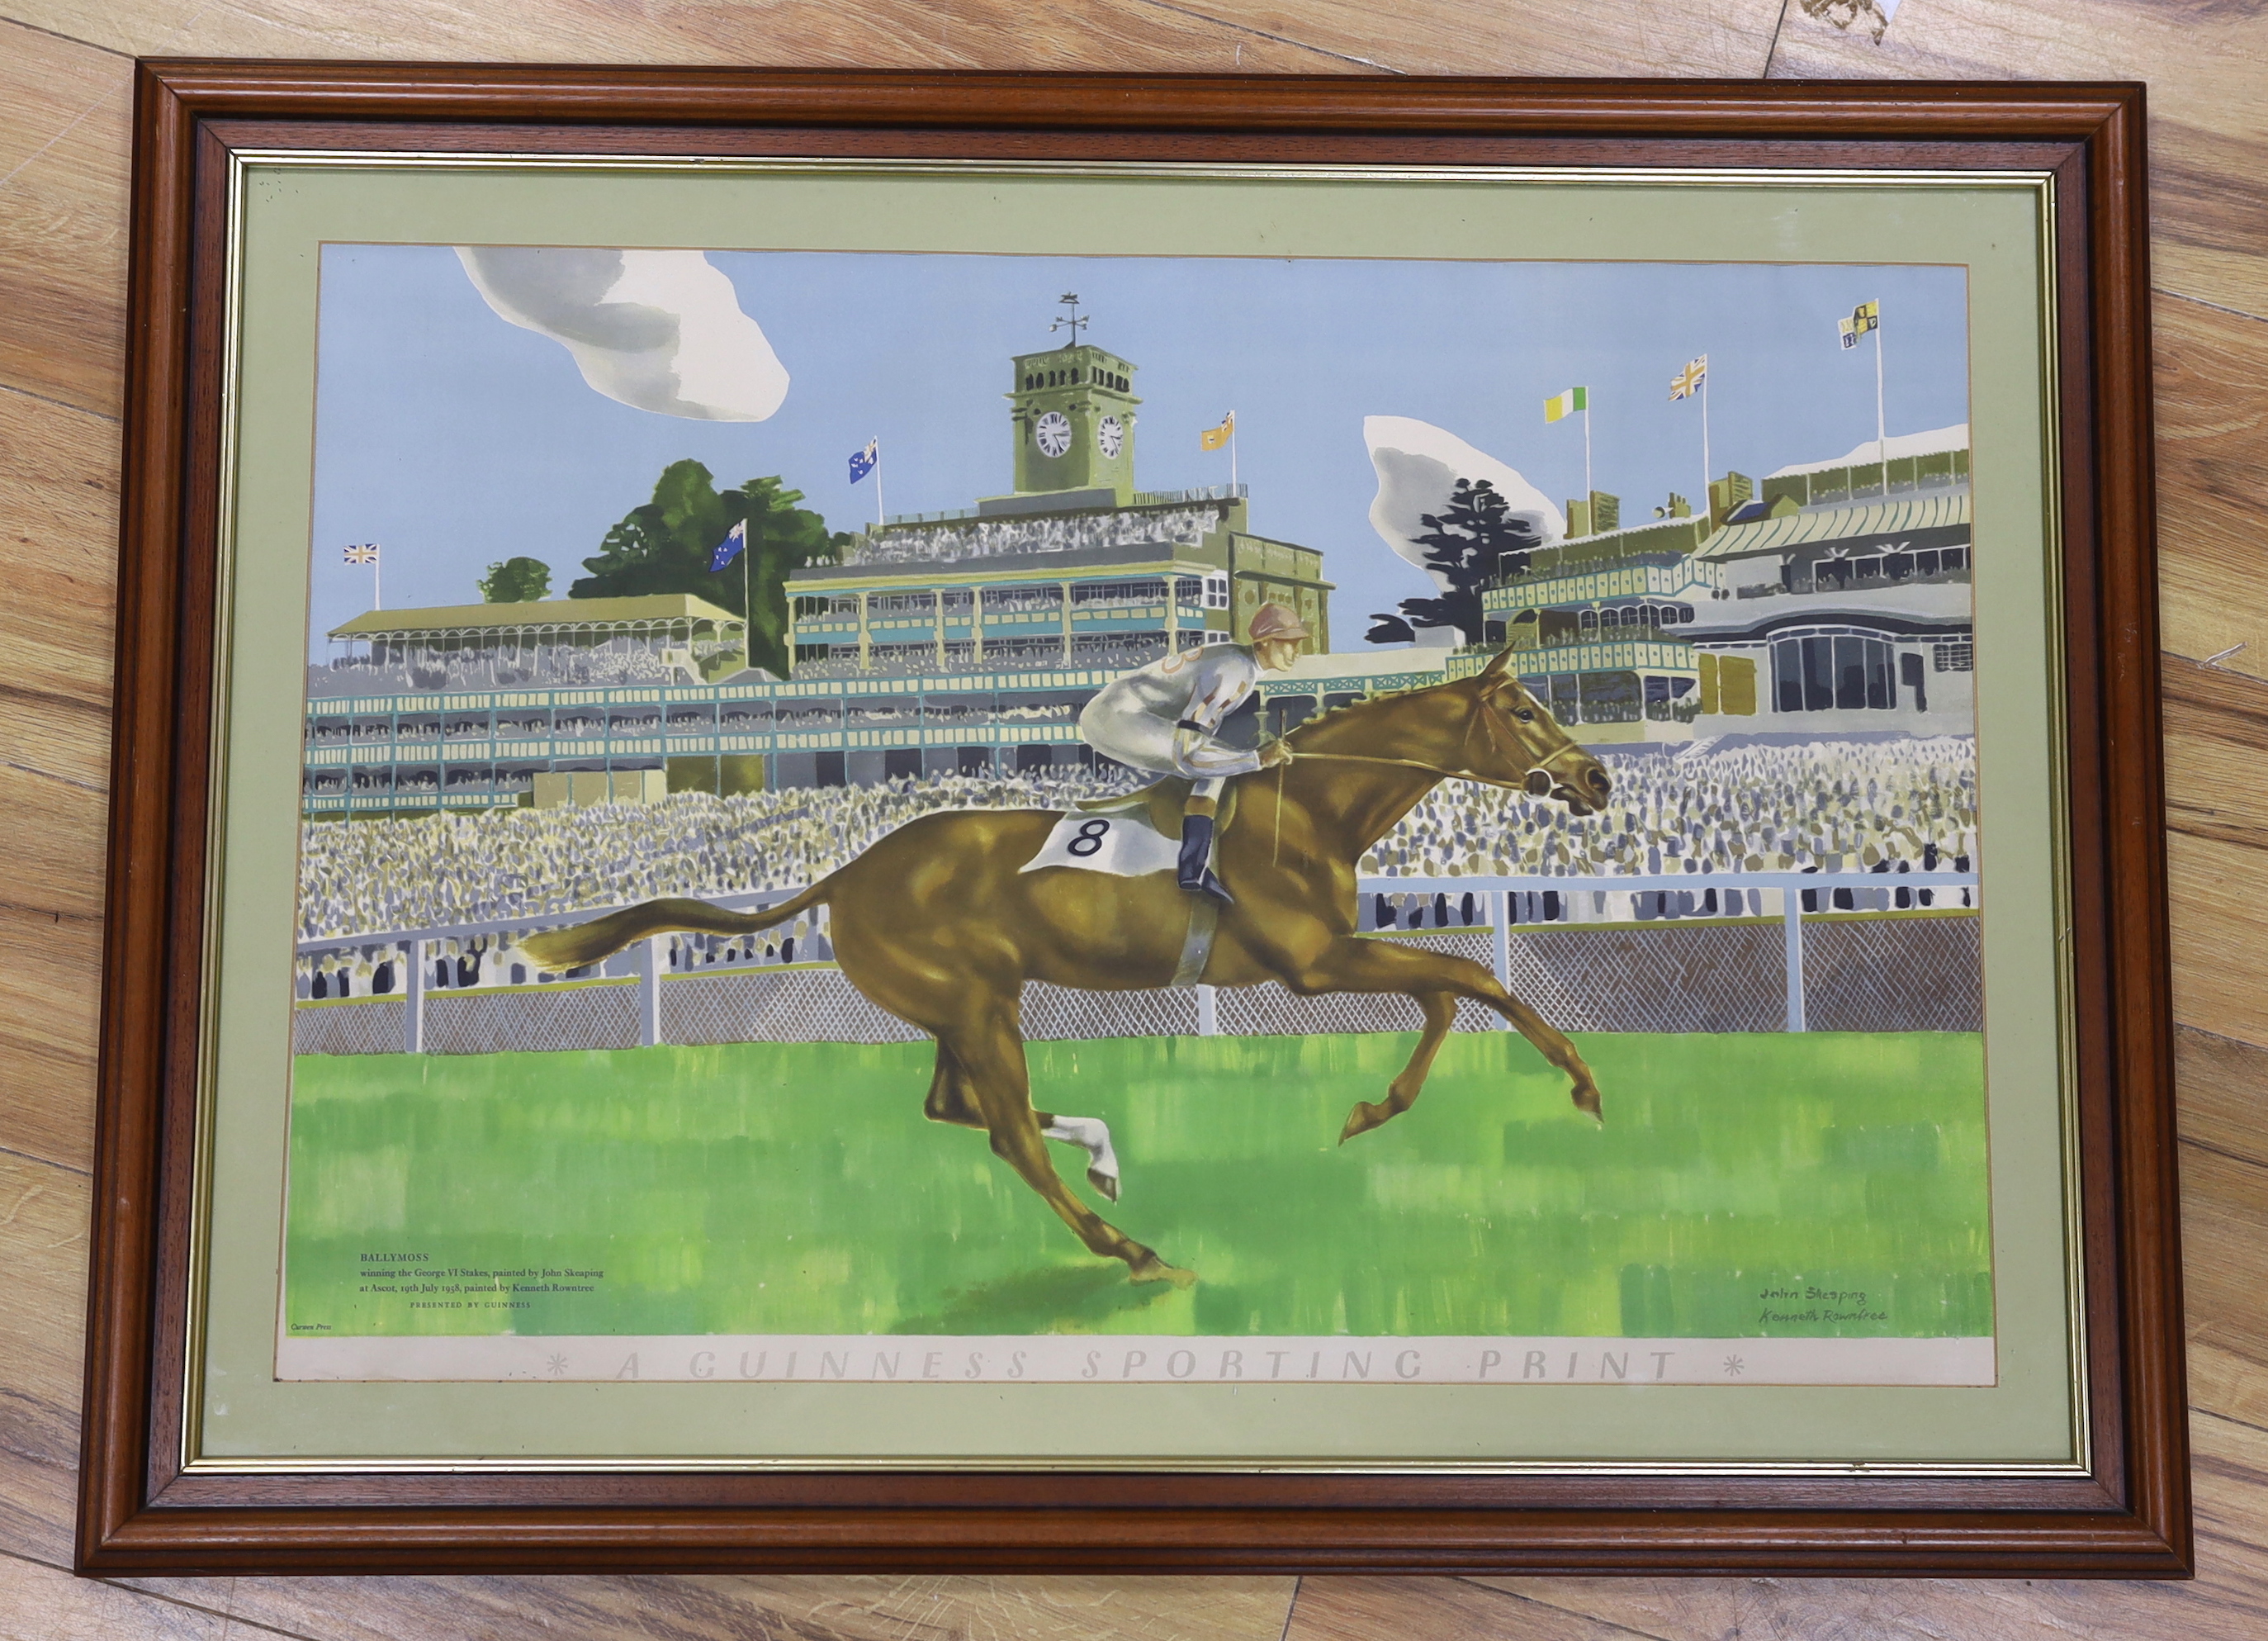 John Skeaping (1901-1980) A Guinness Sporting Print, colour lithograph, Ballymoss winning George VI stakes, printed by Curwen Press, 72 x 49cm